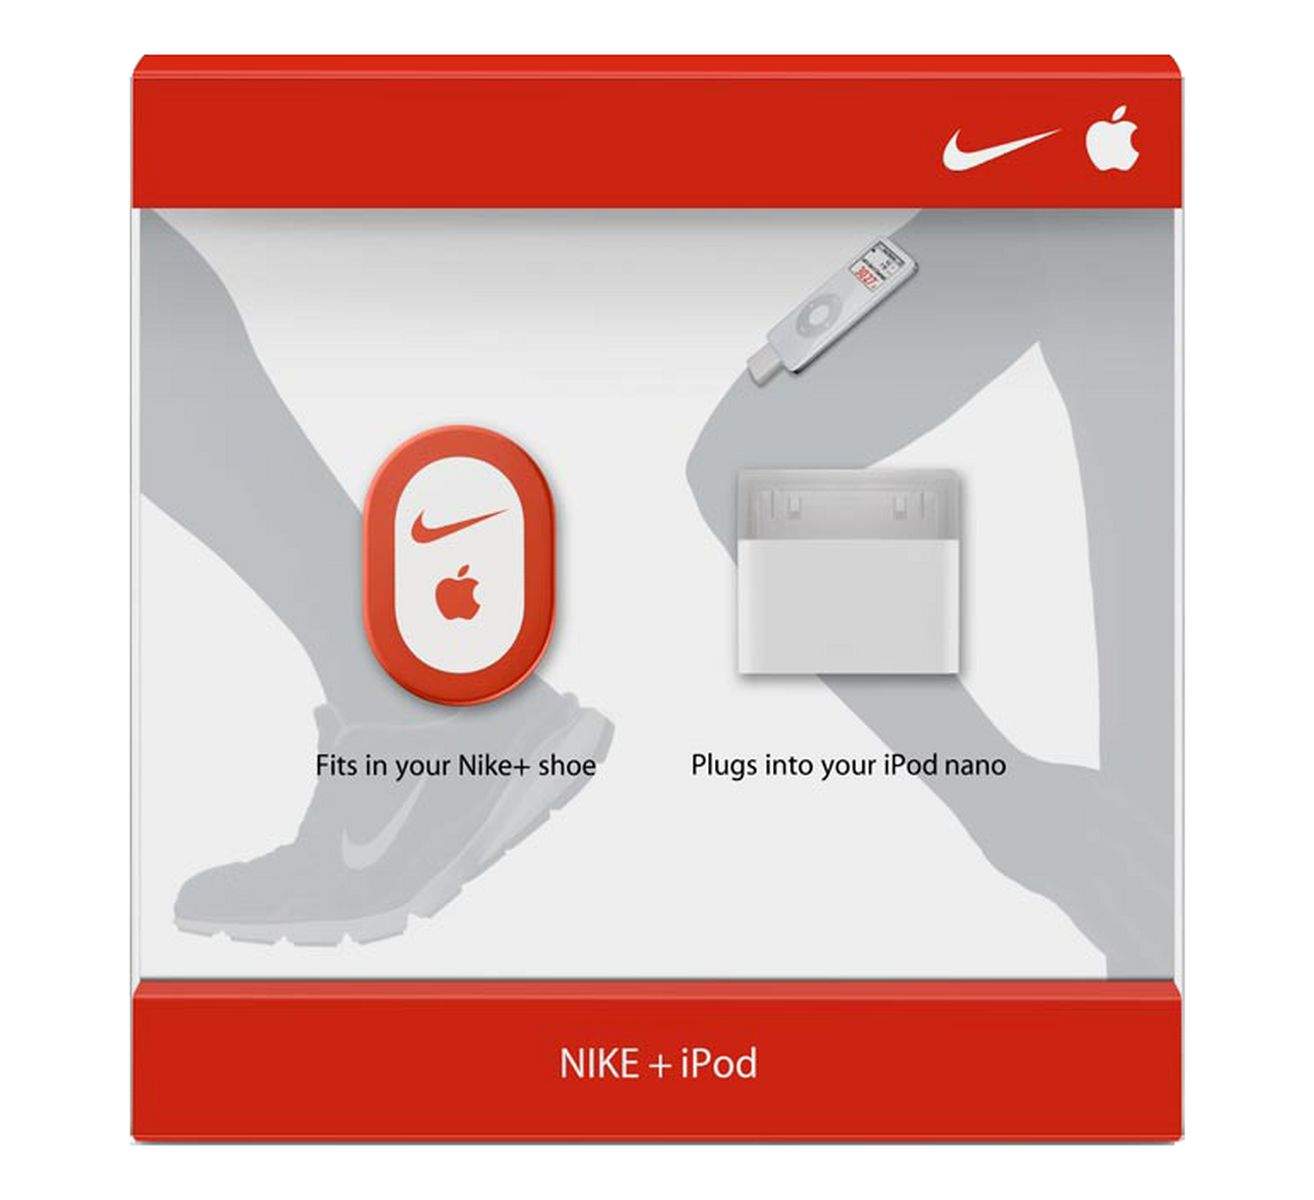 Corbata continuar Remontarse Today in Apple history: Nike+iPod Sport Kit puts fitness tracking in pockets